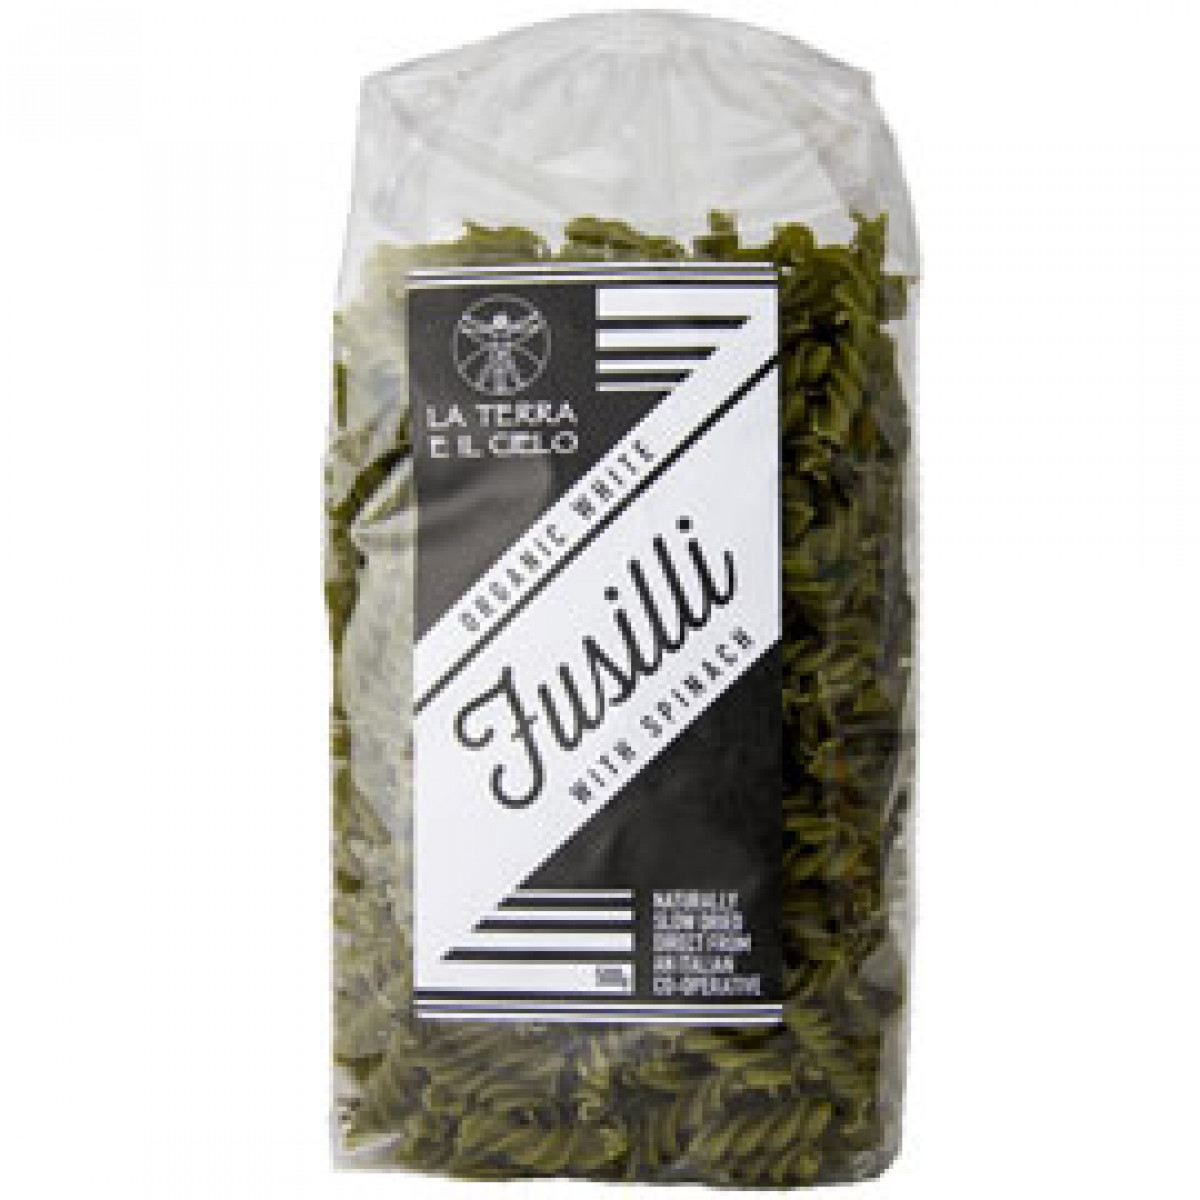 Product picture for White Fusilli with Spinach